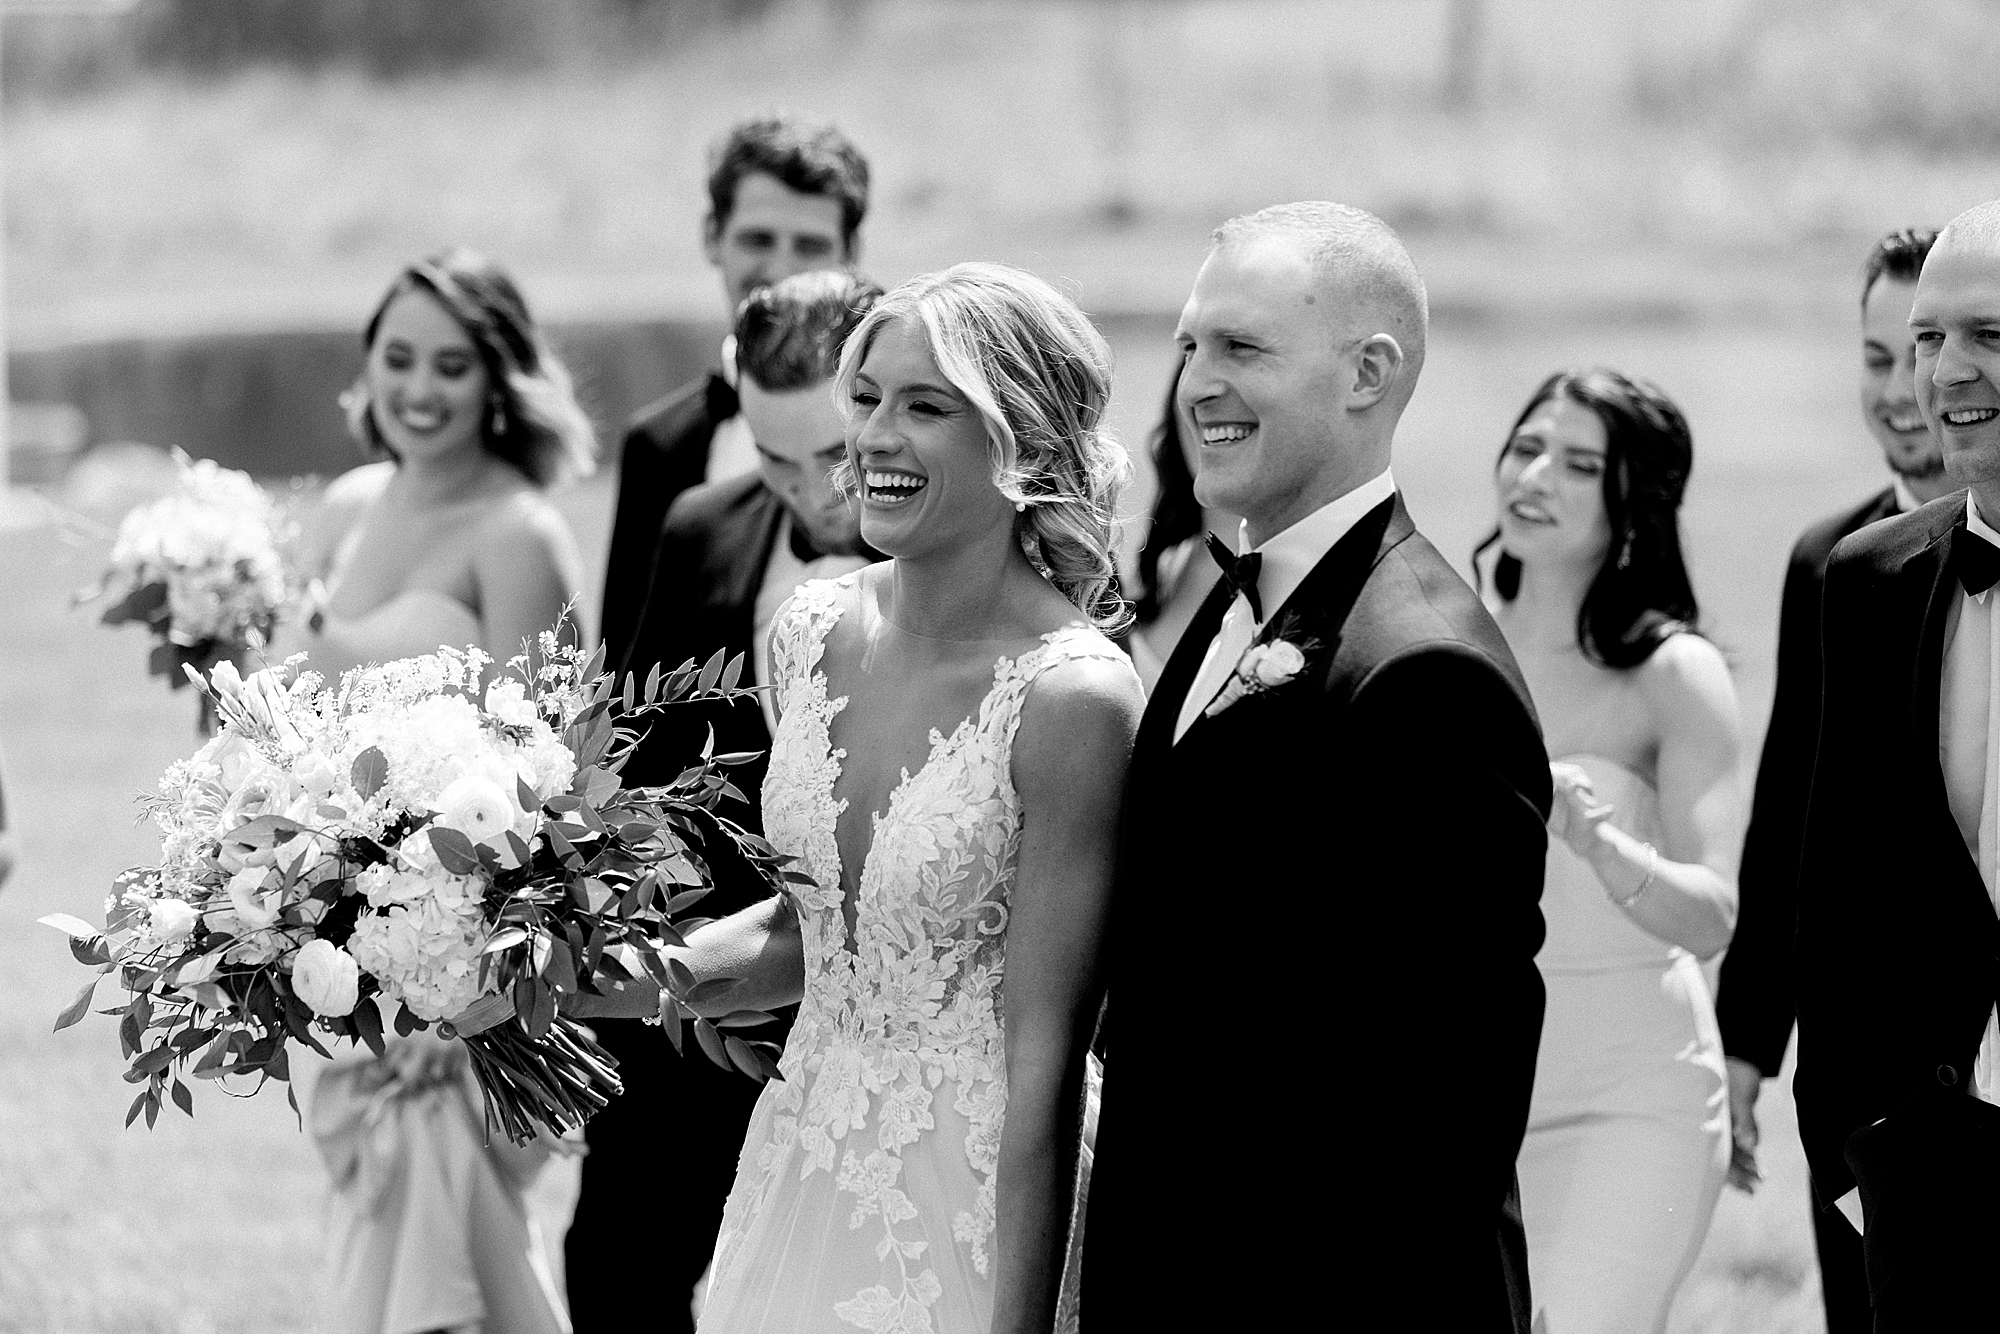 A romantic late Spring wedding at The Oakley in Holly, Michigan by Breanne Rochelle Photography.